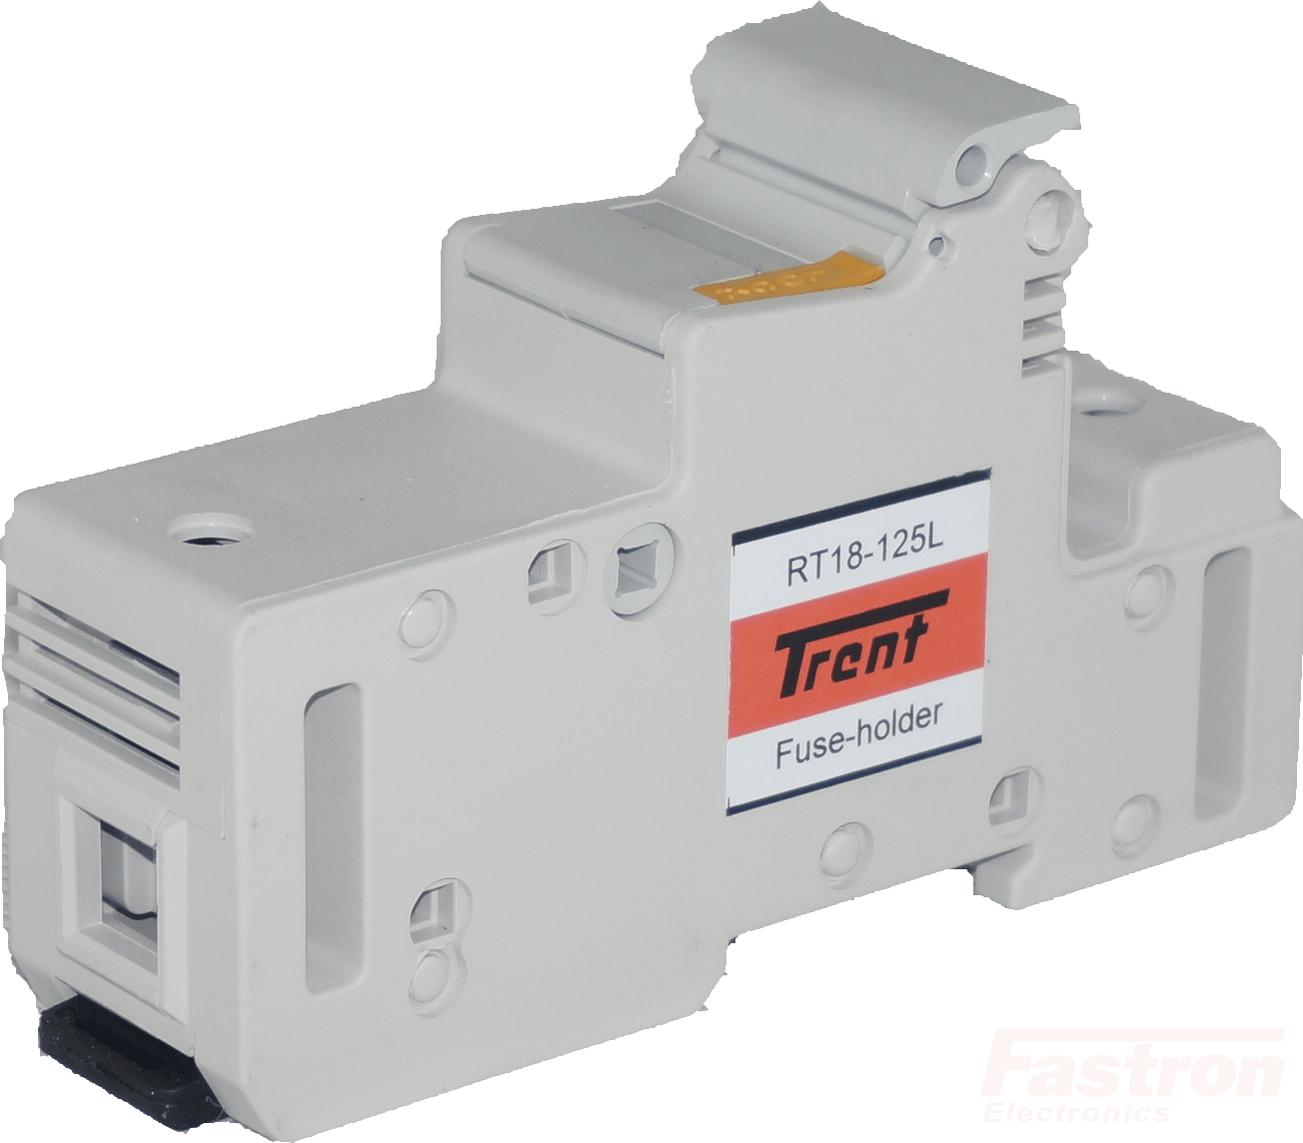 Trent gR Semiconductor Fuse Holder RT18-125L, Quick Release Fuse Holder/Cartridge for 25 to 125 Amp 22x58mm Fuse Links FE-RT18-125L